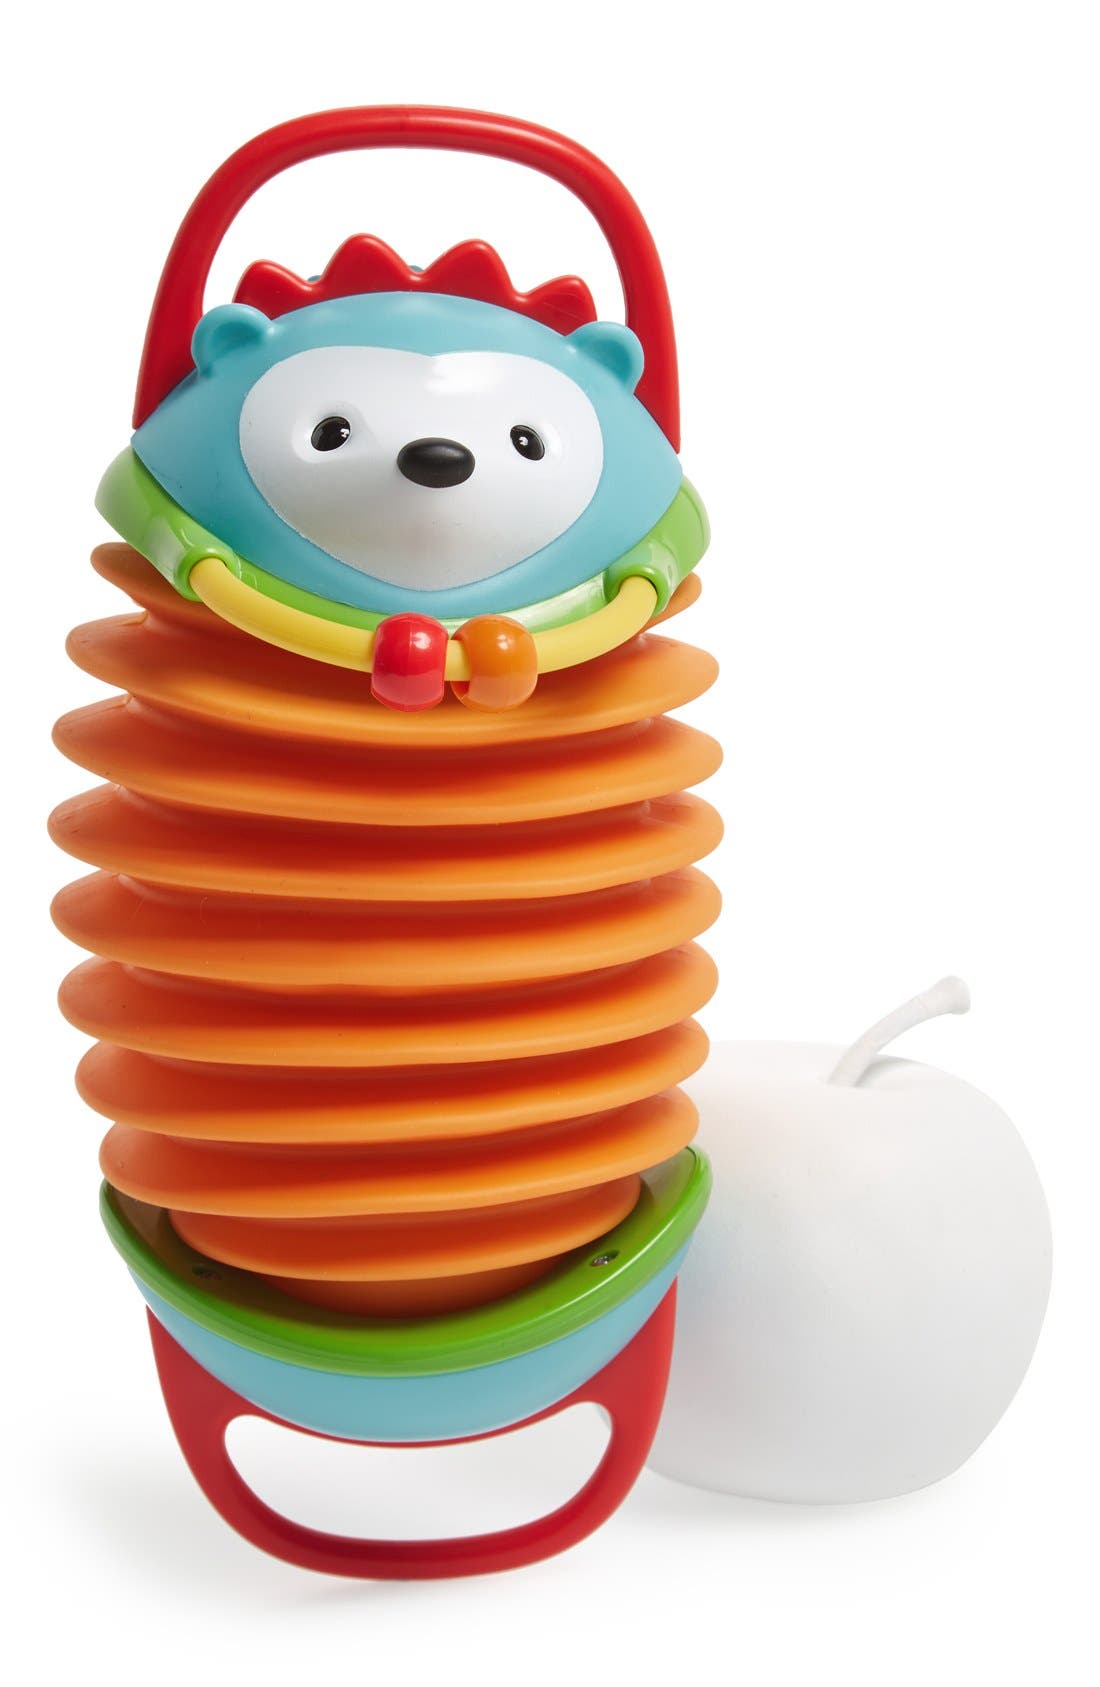 Hedgehog Skip Hop Baby Explore and More Musical Instrument Accordion Toy Multi 